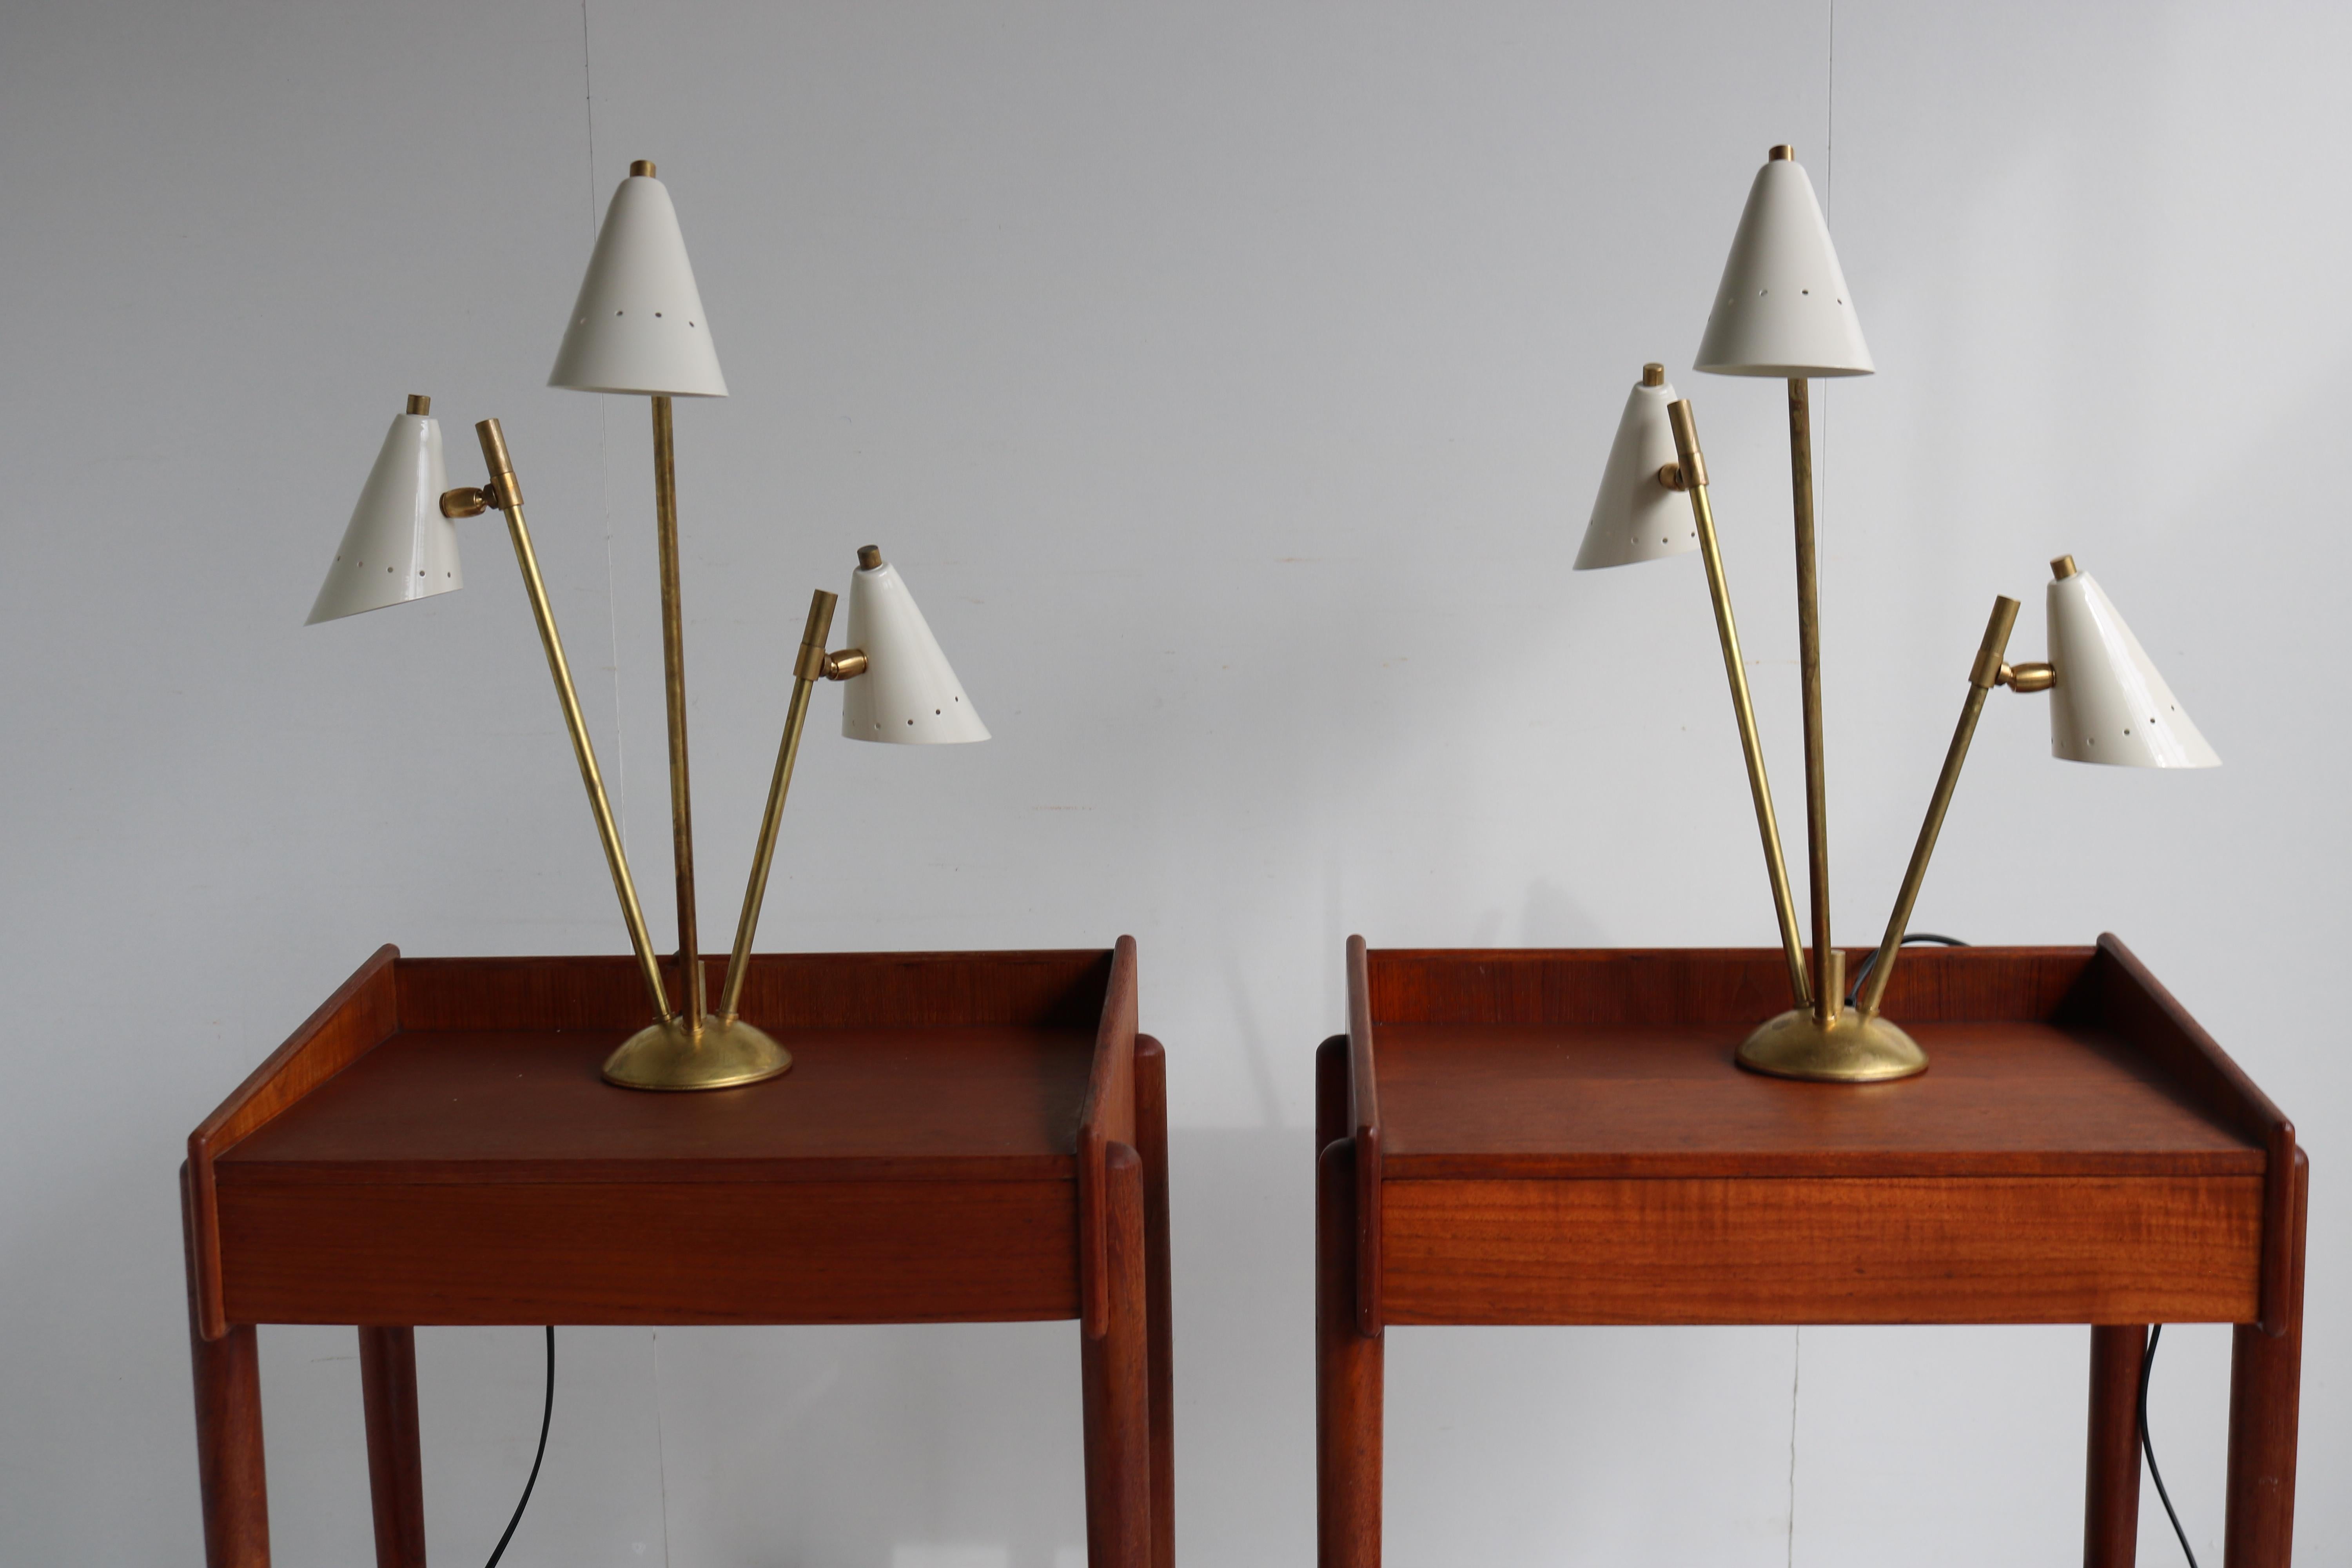 Gorgeous pair of Italian 1950 design table lamps/lights in the style of stilnovo. 
Patinated brass frame with white metal shades. The shades can be adjusted to a desired angle.
They combine really well with teak as seen in pictures. 

Rewired